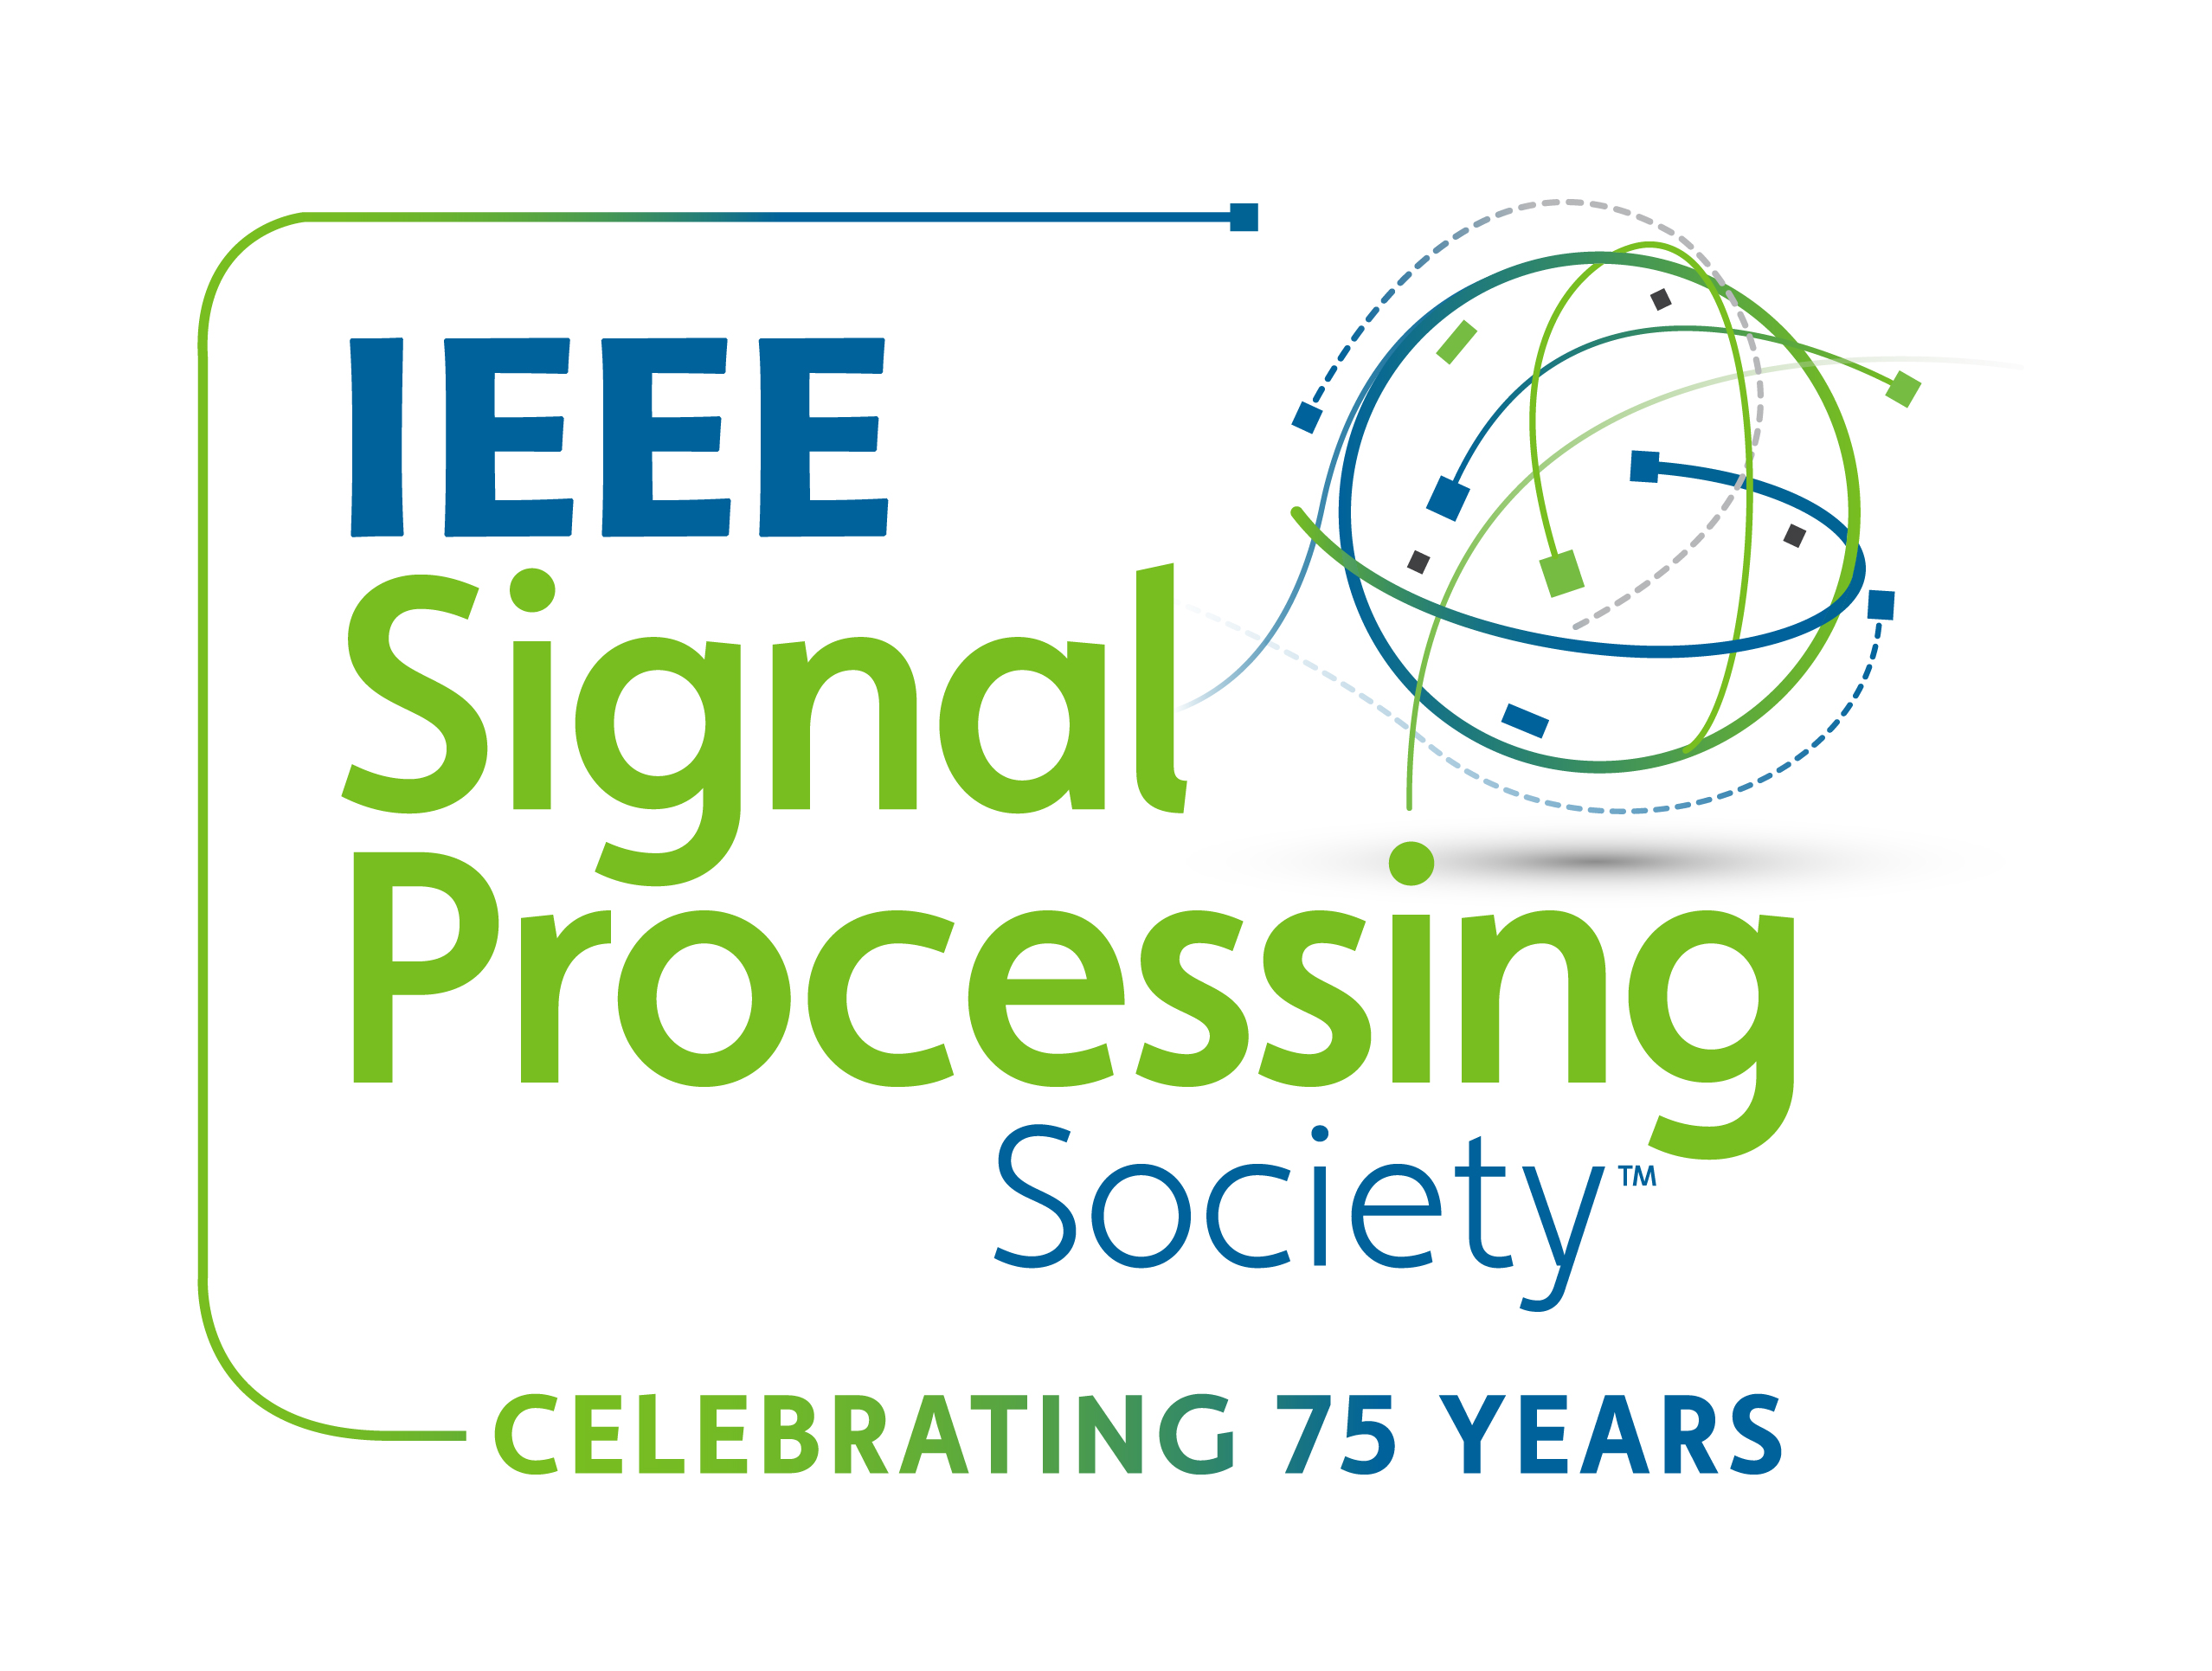 Logo of the IEEE Signal Processing Society